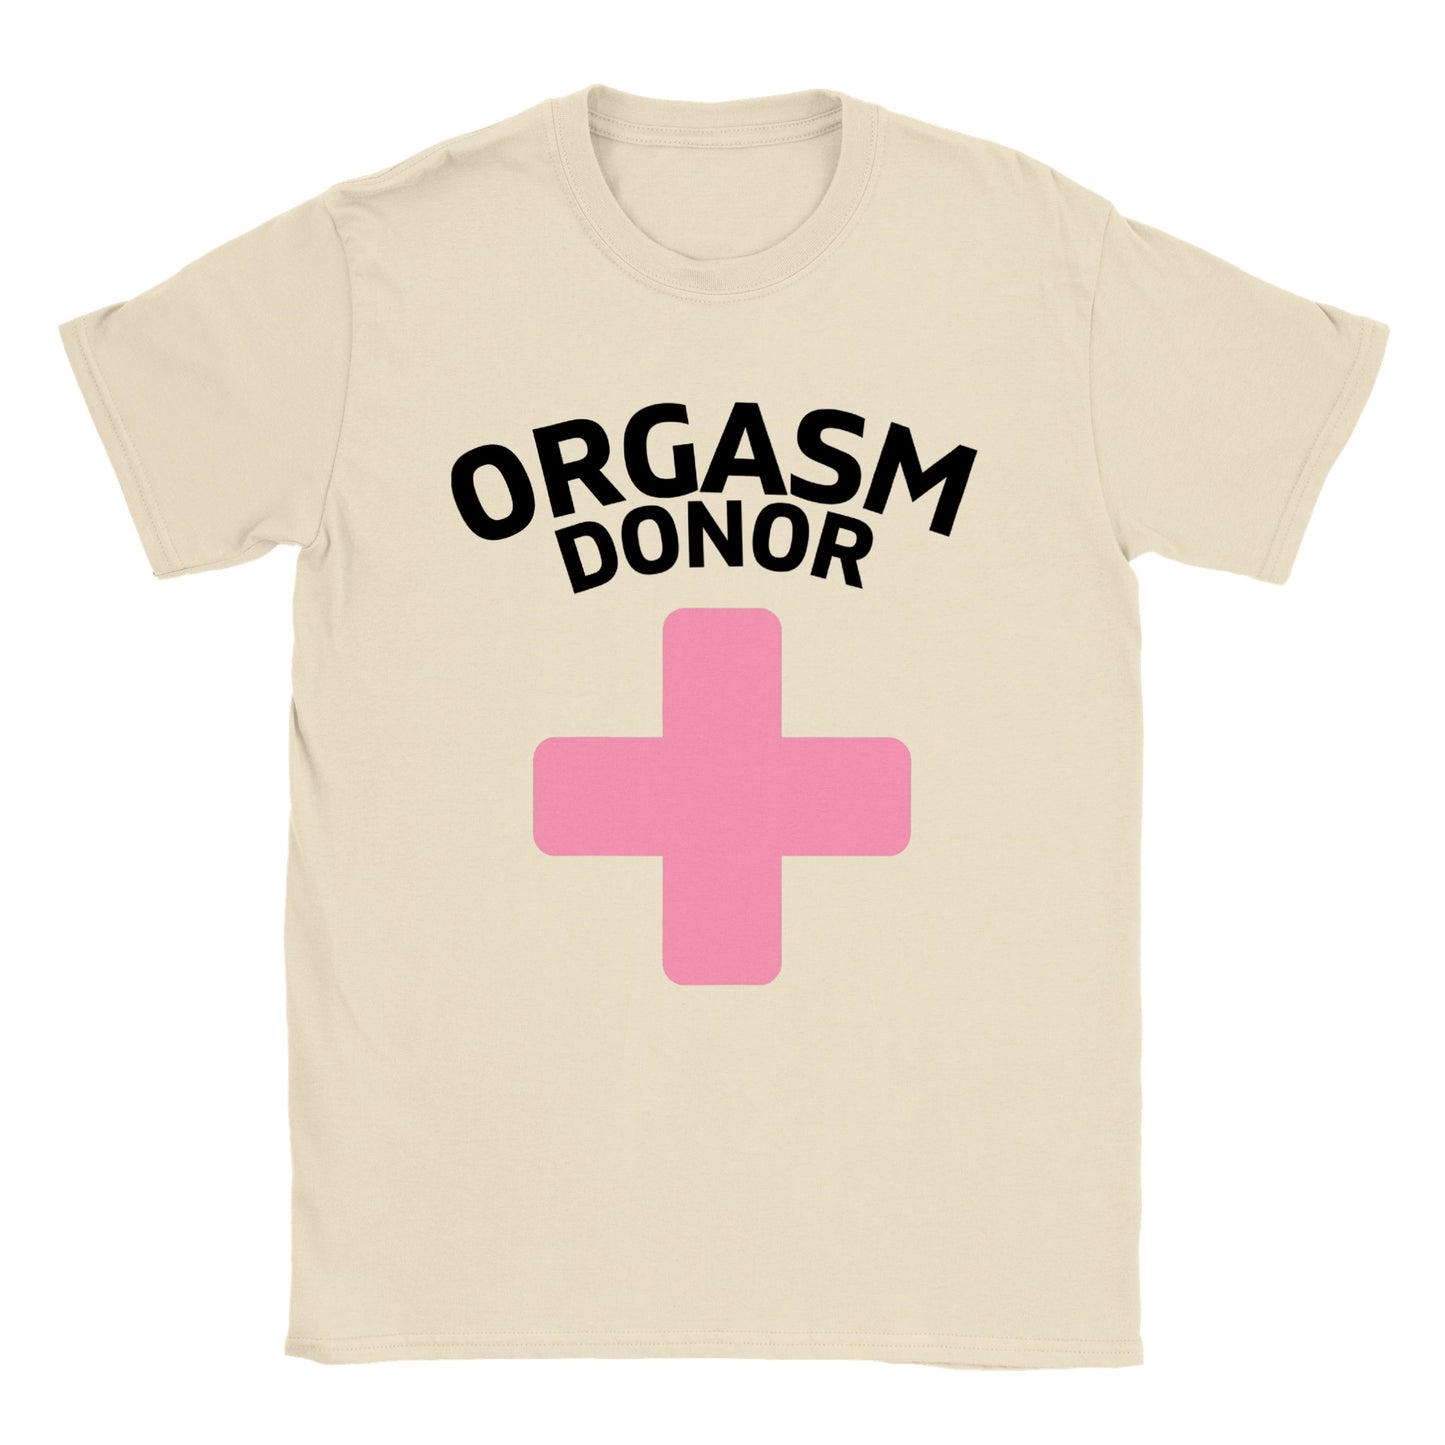 Orgasm Donor - Classic Unisex Crewneck T-shirt - Mister Snarky's